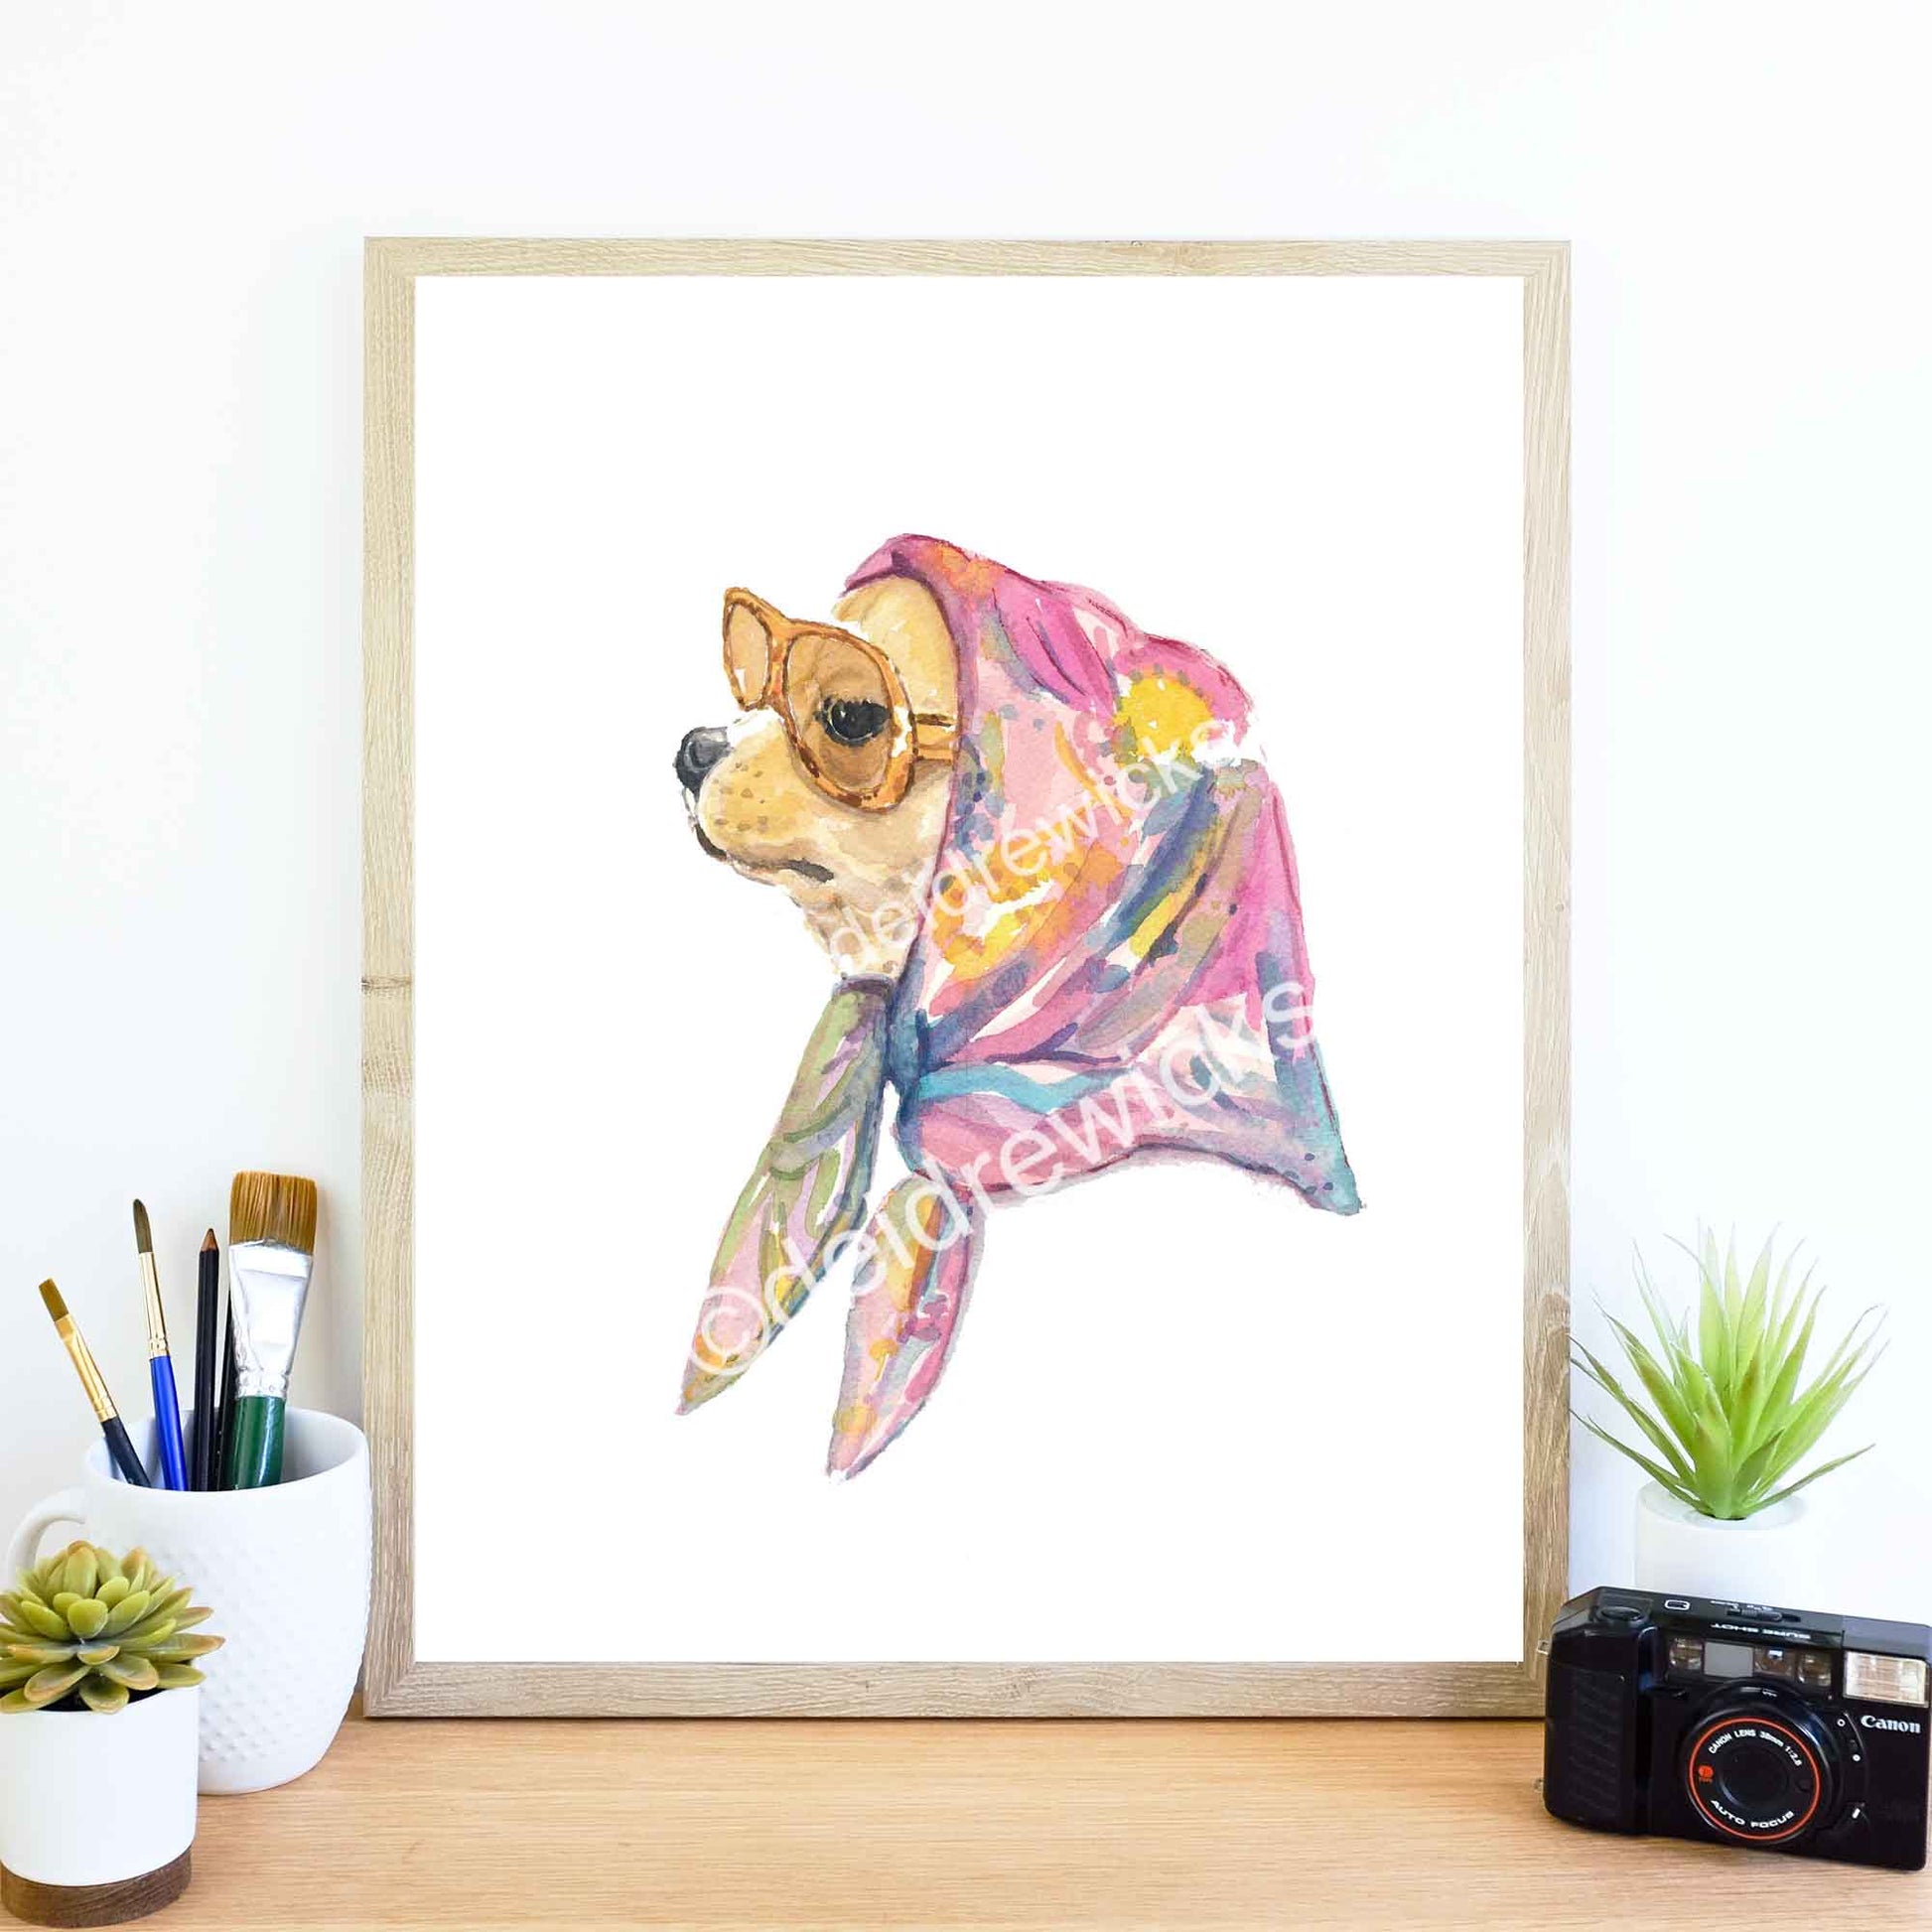 Fine Art print of a chihuahua dog wearing vintage scarf and sunglasses